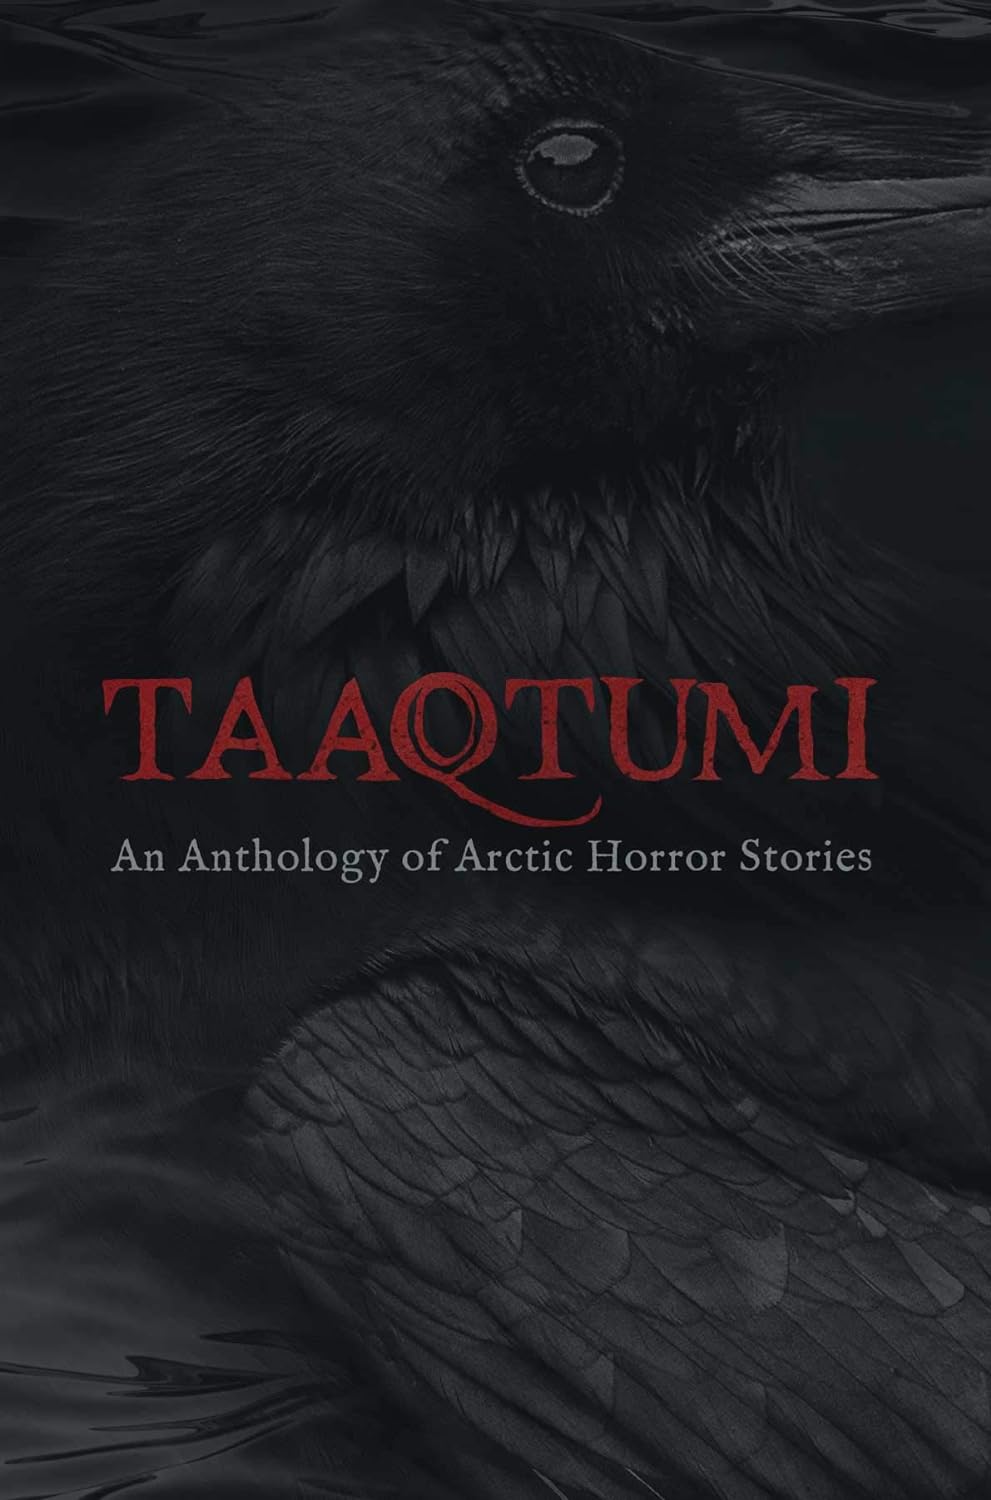 Taaqtumi: An Anthology of Arctic Horror Stories -Various Authors - The Society for Unusual Books